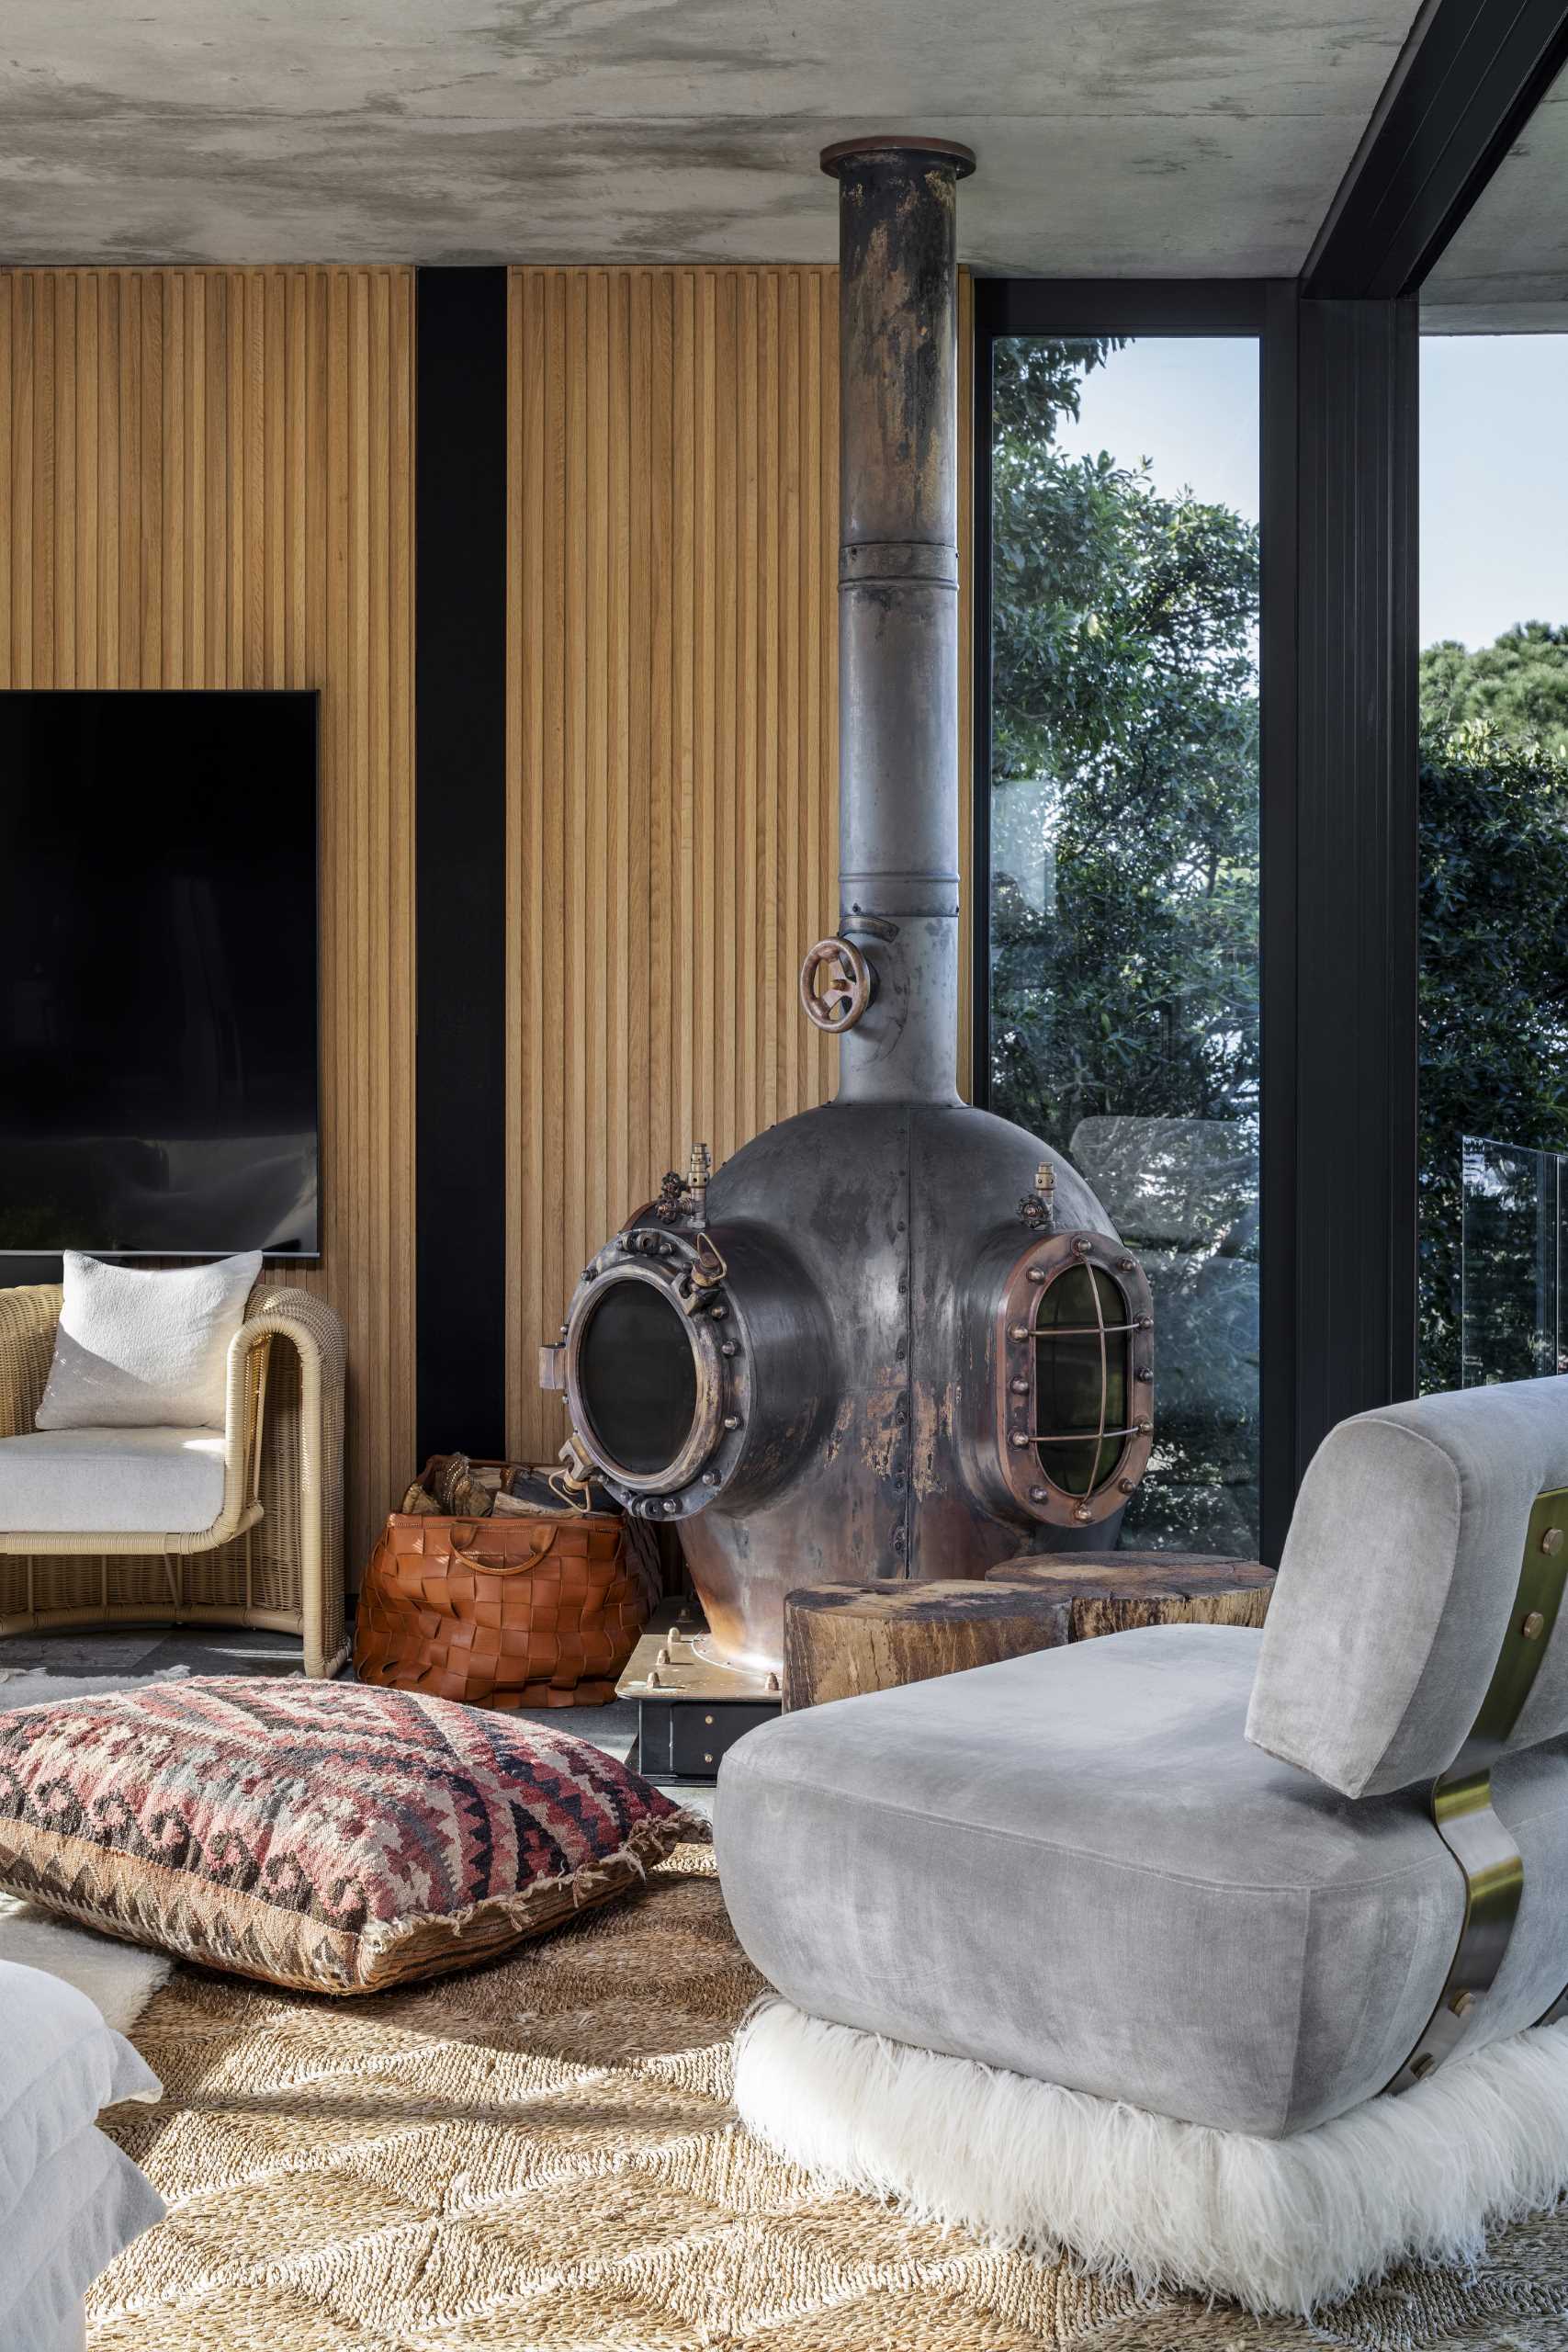 A fireplace inspired by a 1920s copper diving helmet.